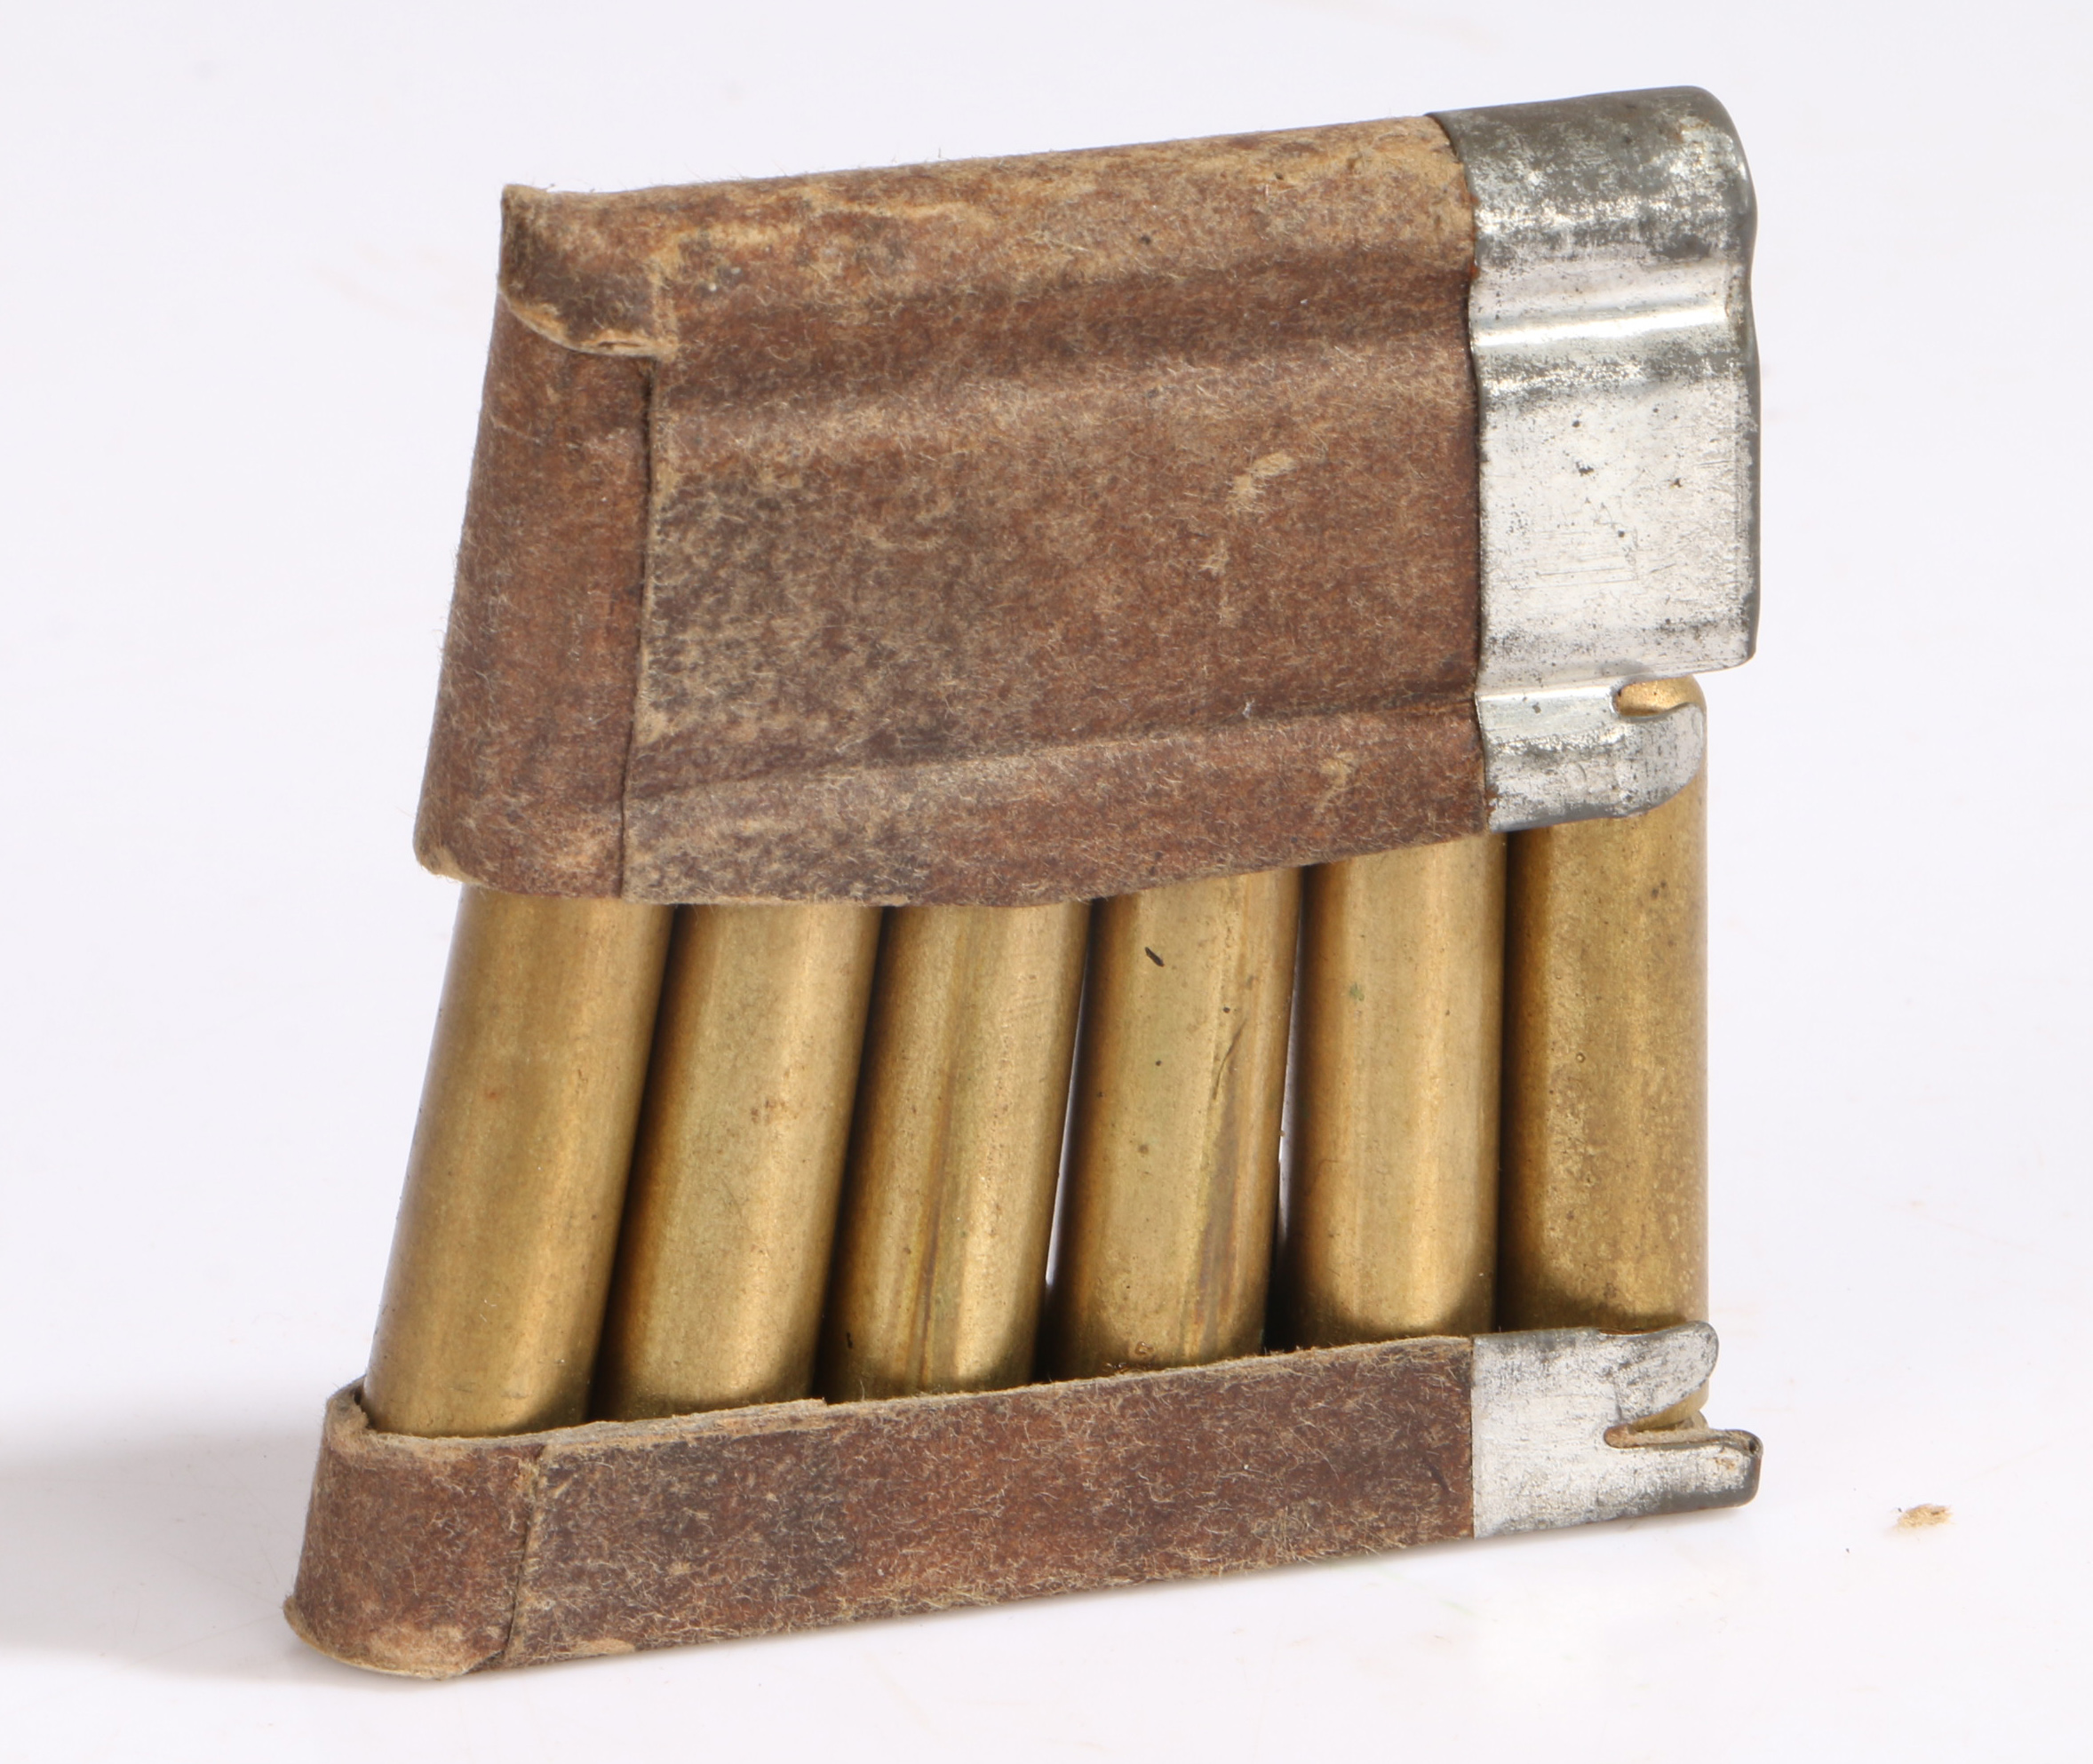 Charging clip of six Swiss made 6.6 x 55 rounds for the K31 6.5mm rifle, steel cases with cupro- - Image 2 of 2